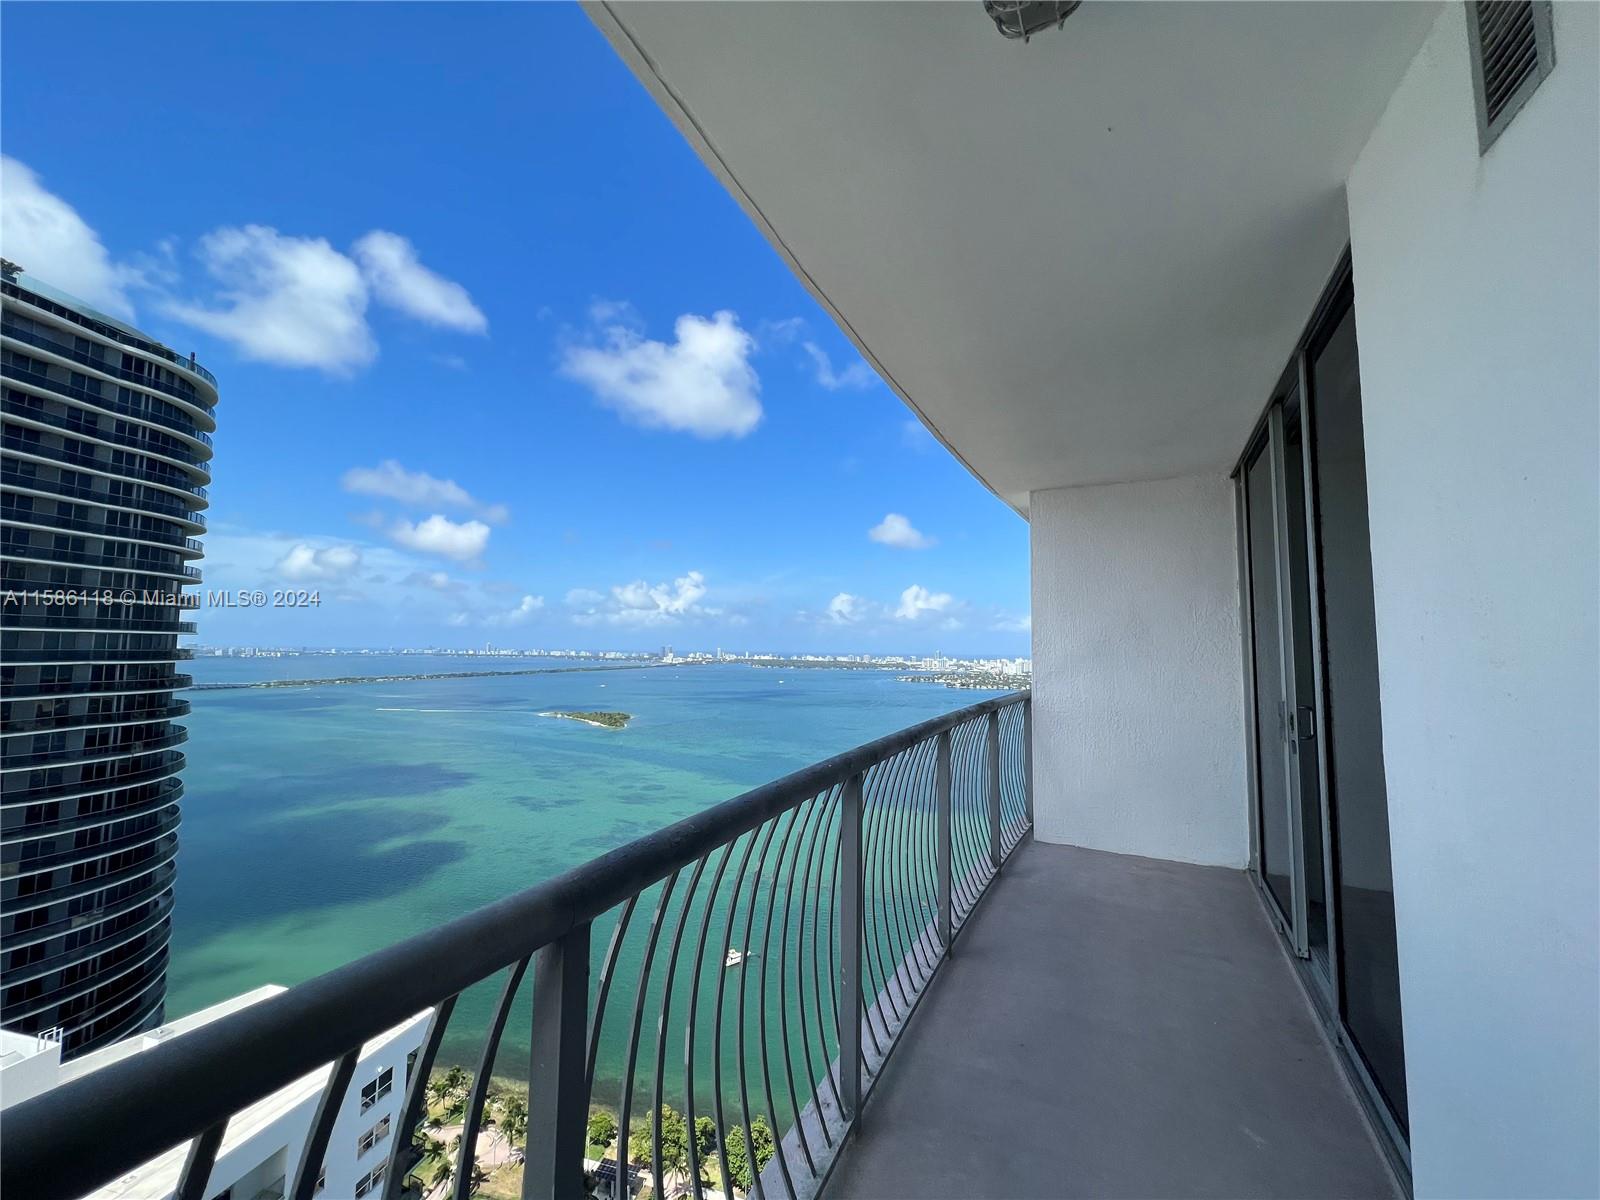 Newly remodeled unit w/many upgrades; flooring, paint, door glass door in the master bathroom. 47-floor balcony w/gorgeous views of Biscayne Bay, Miami Skyline, Bayfront Park. 1 block to Metro Mover, 100yds from Publix & across the street from 8-acre Margaret Pace park on the Bay! Valet parking and ample public parking for guests. SAFE & SECURE w/multi-level 24hr security, gated parking, valet, doorman, digital facial recognition at all access points & elevator fob. Convenience store and minimart in lobby.